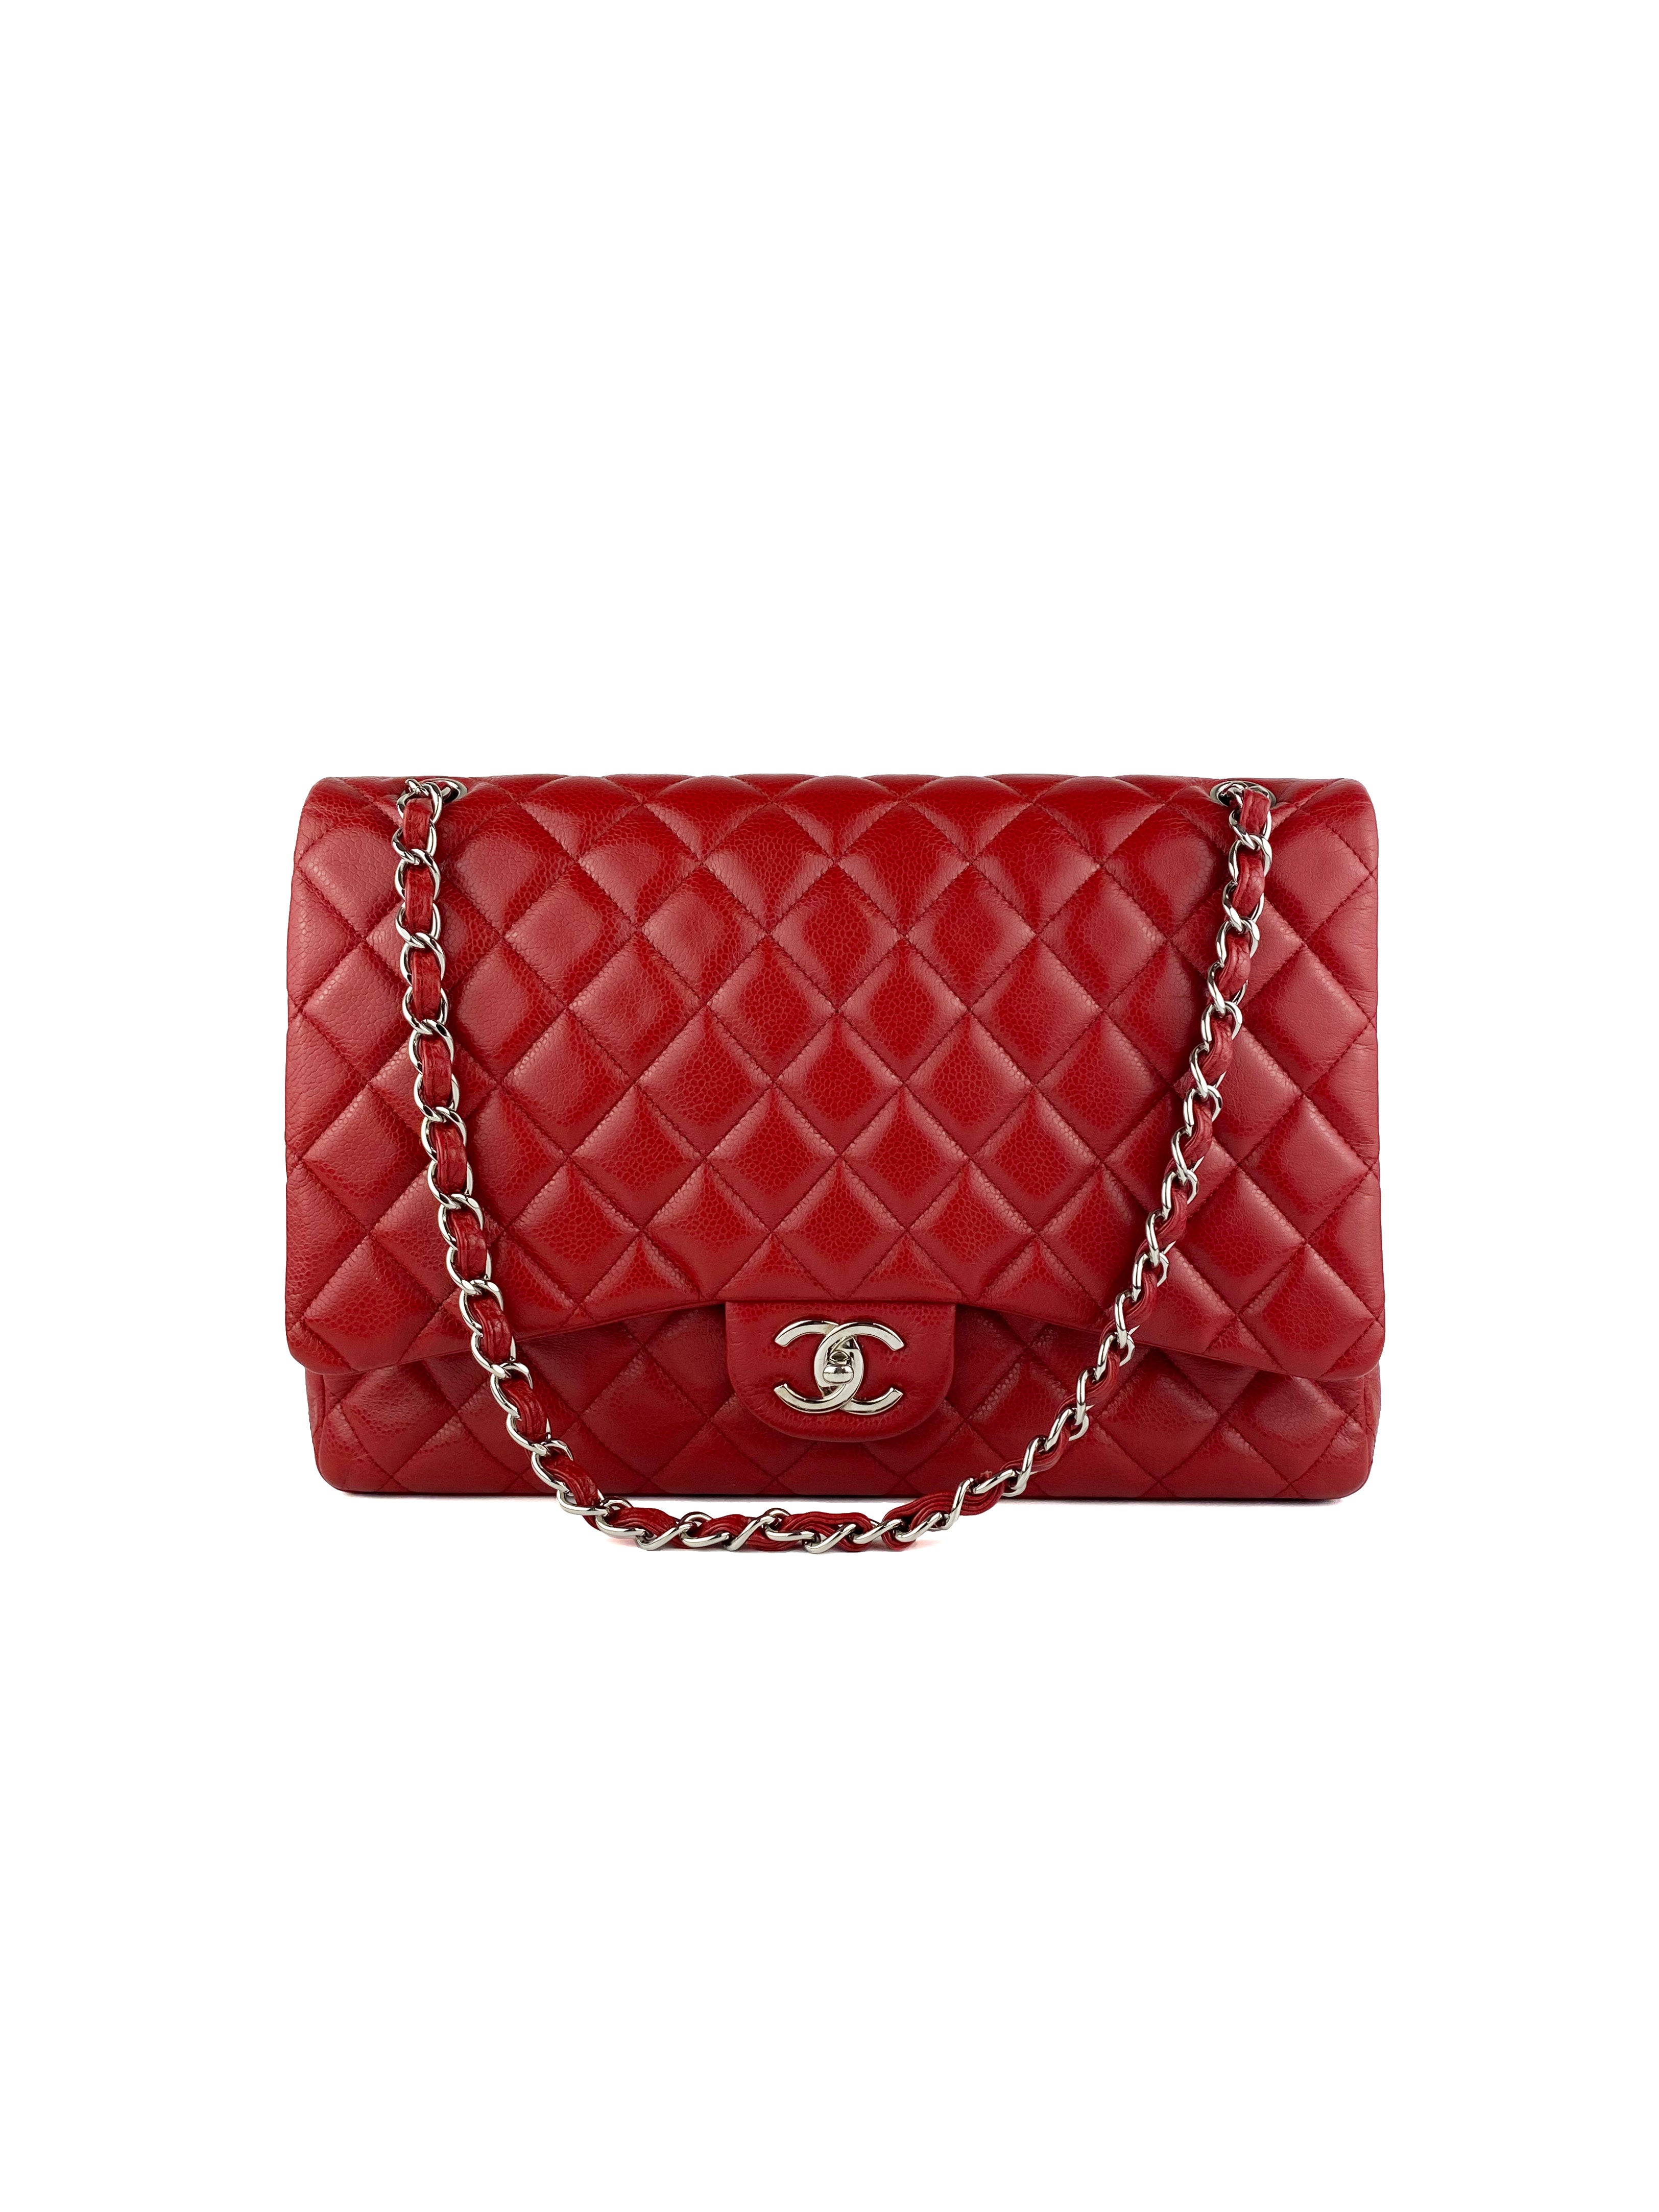 chanel-maxi-classic-flap-red-16.jpg